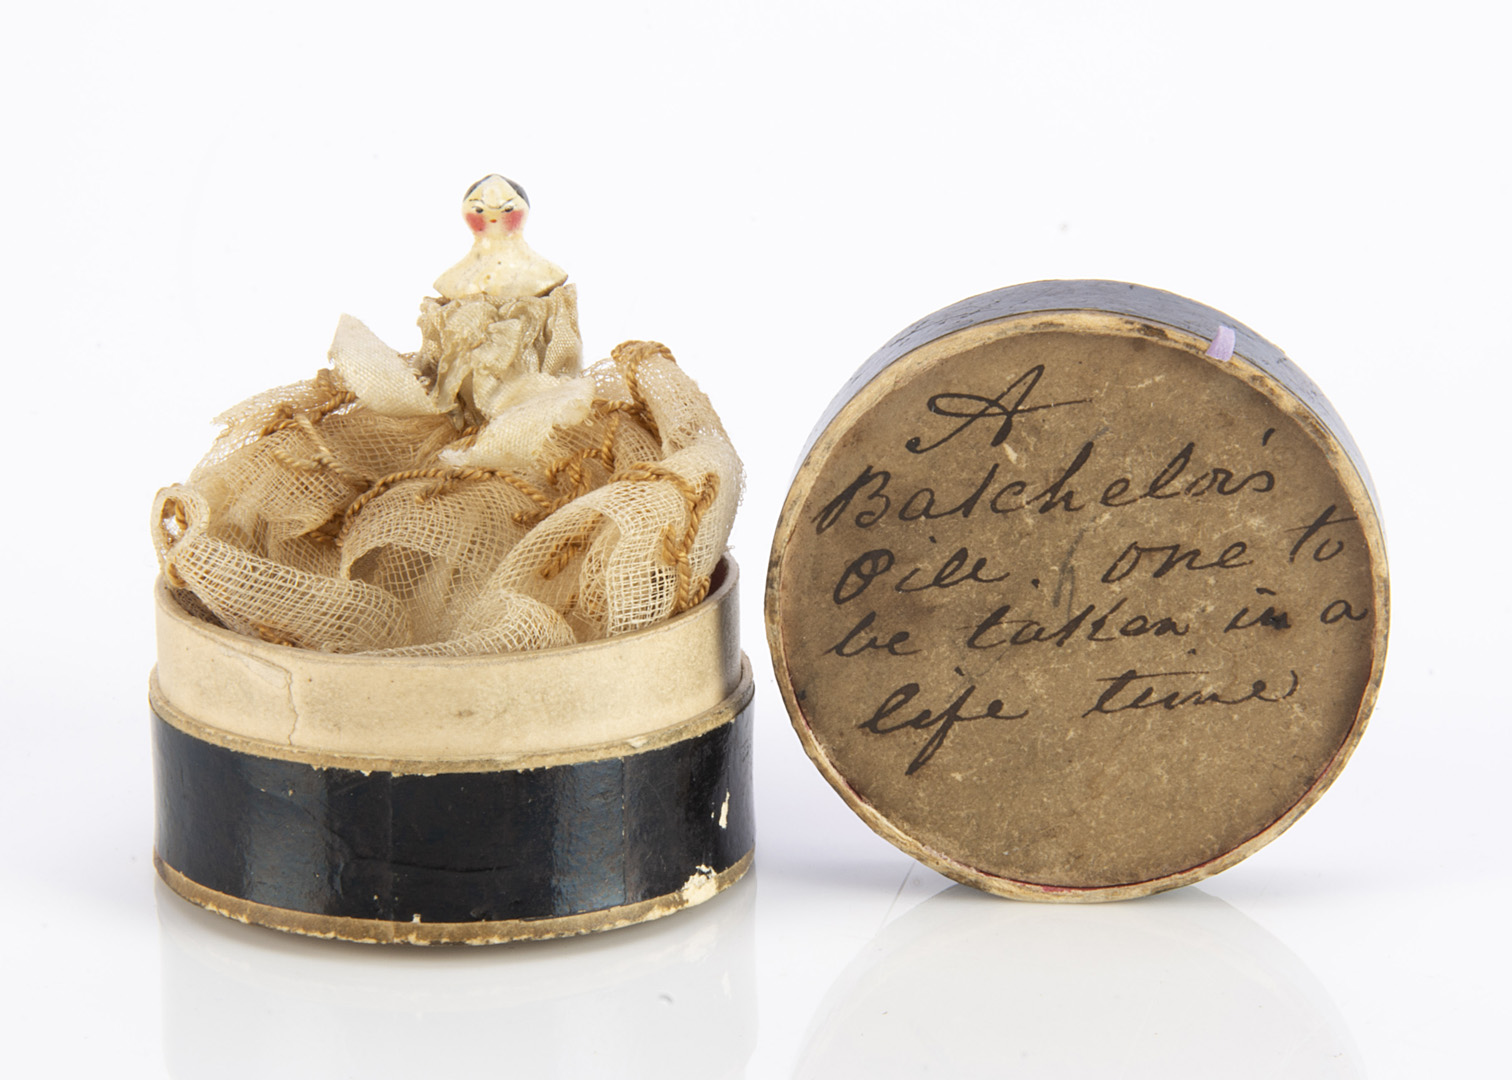 A Batchelor’s Pill One to be Taken in a Life Time, a circular cardboard pill box with handwritten